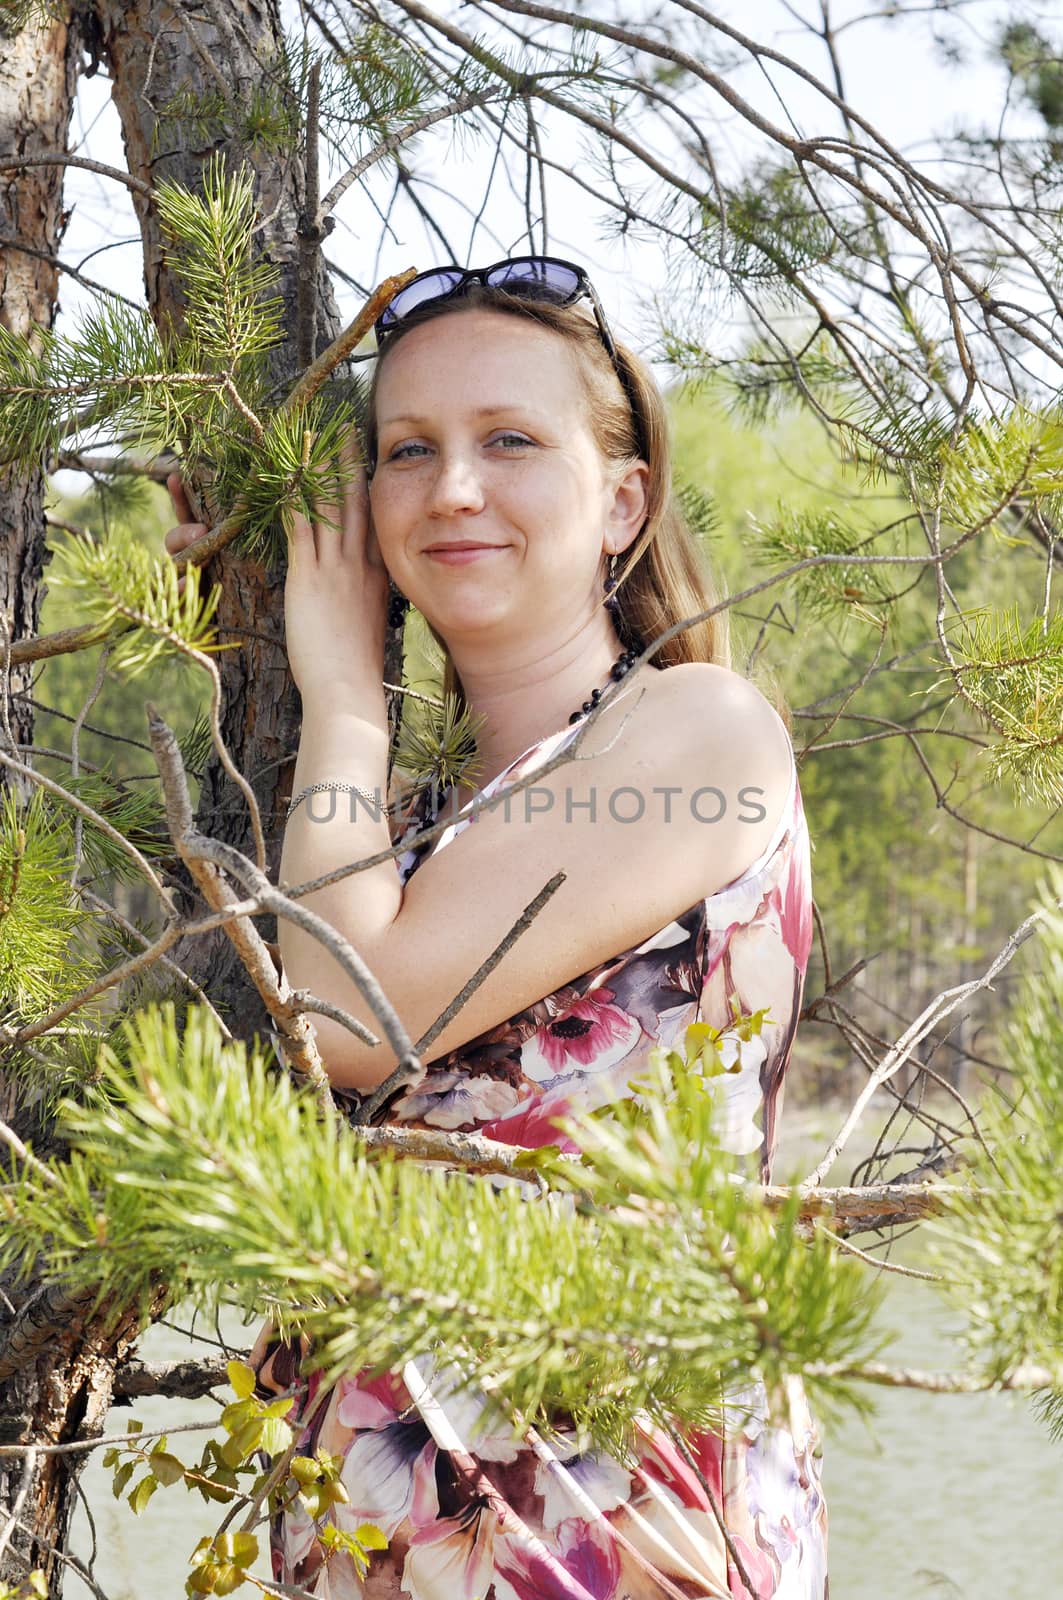 the happy woman costs at a pine. by veronka72